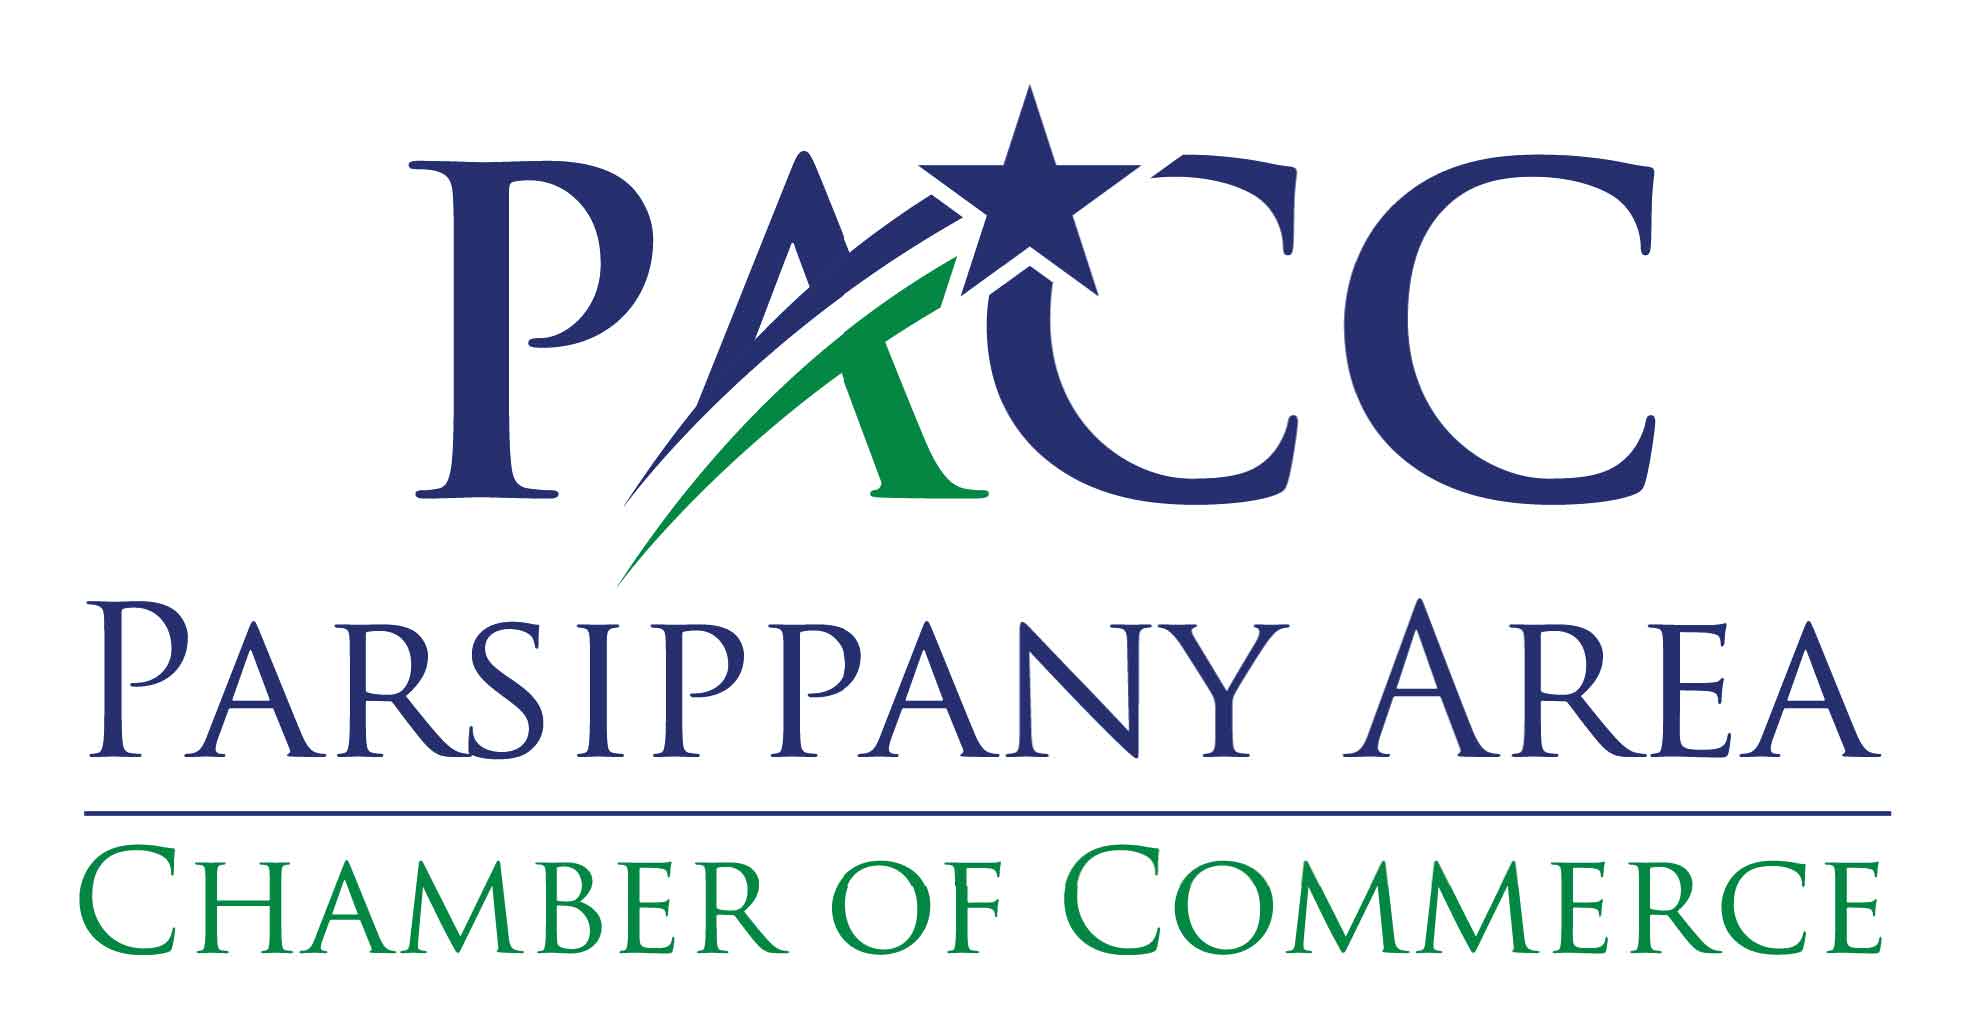 Parsippany Area Chamber of Commerce